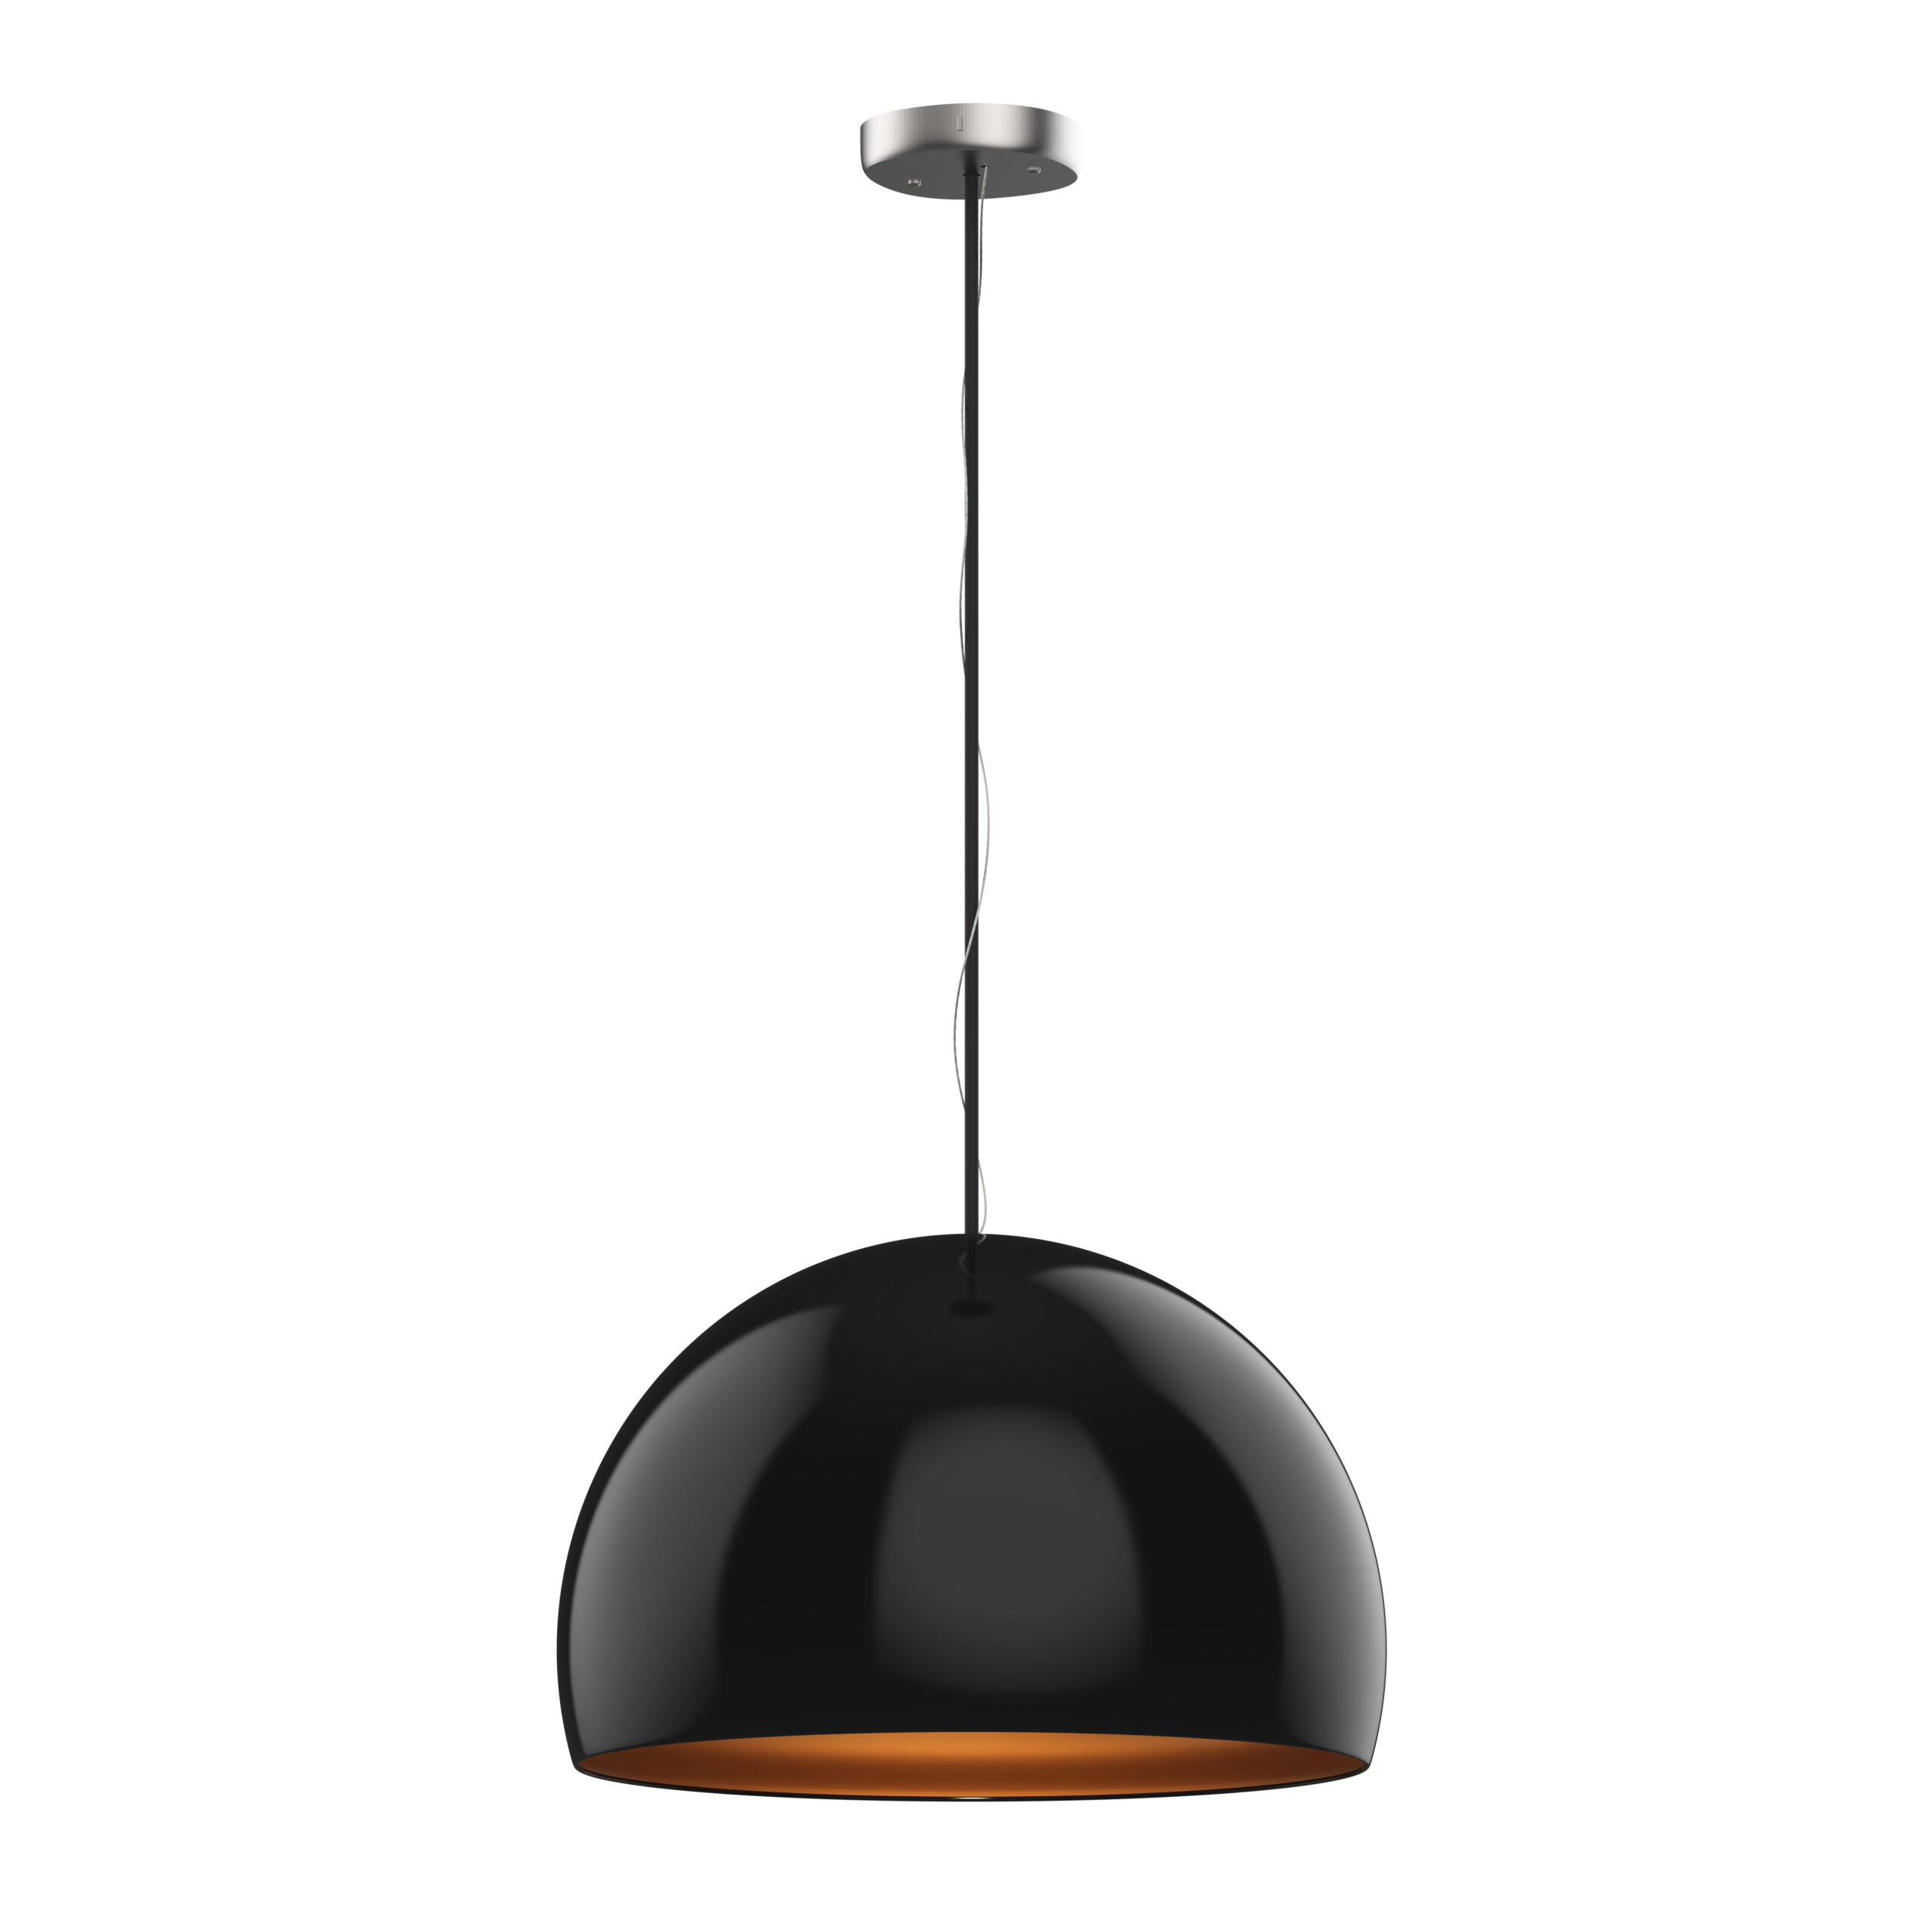 A black and gold lamp